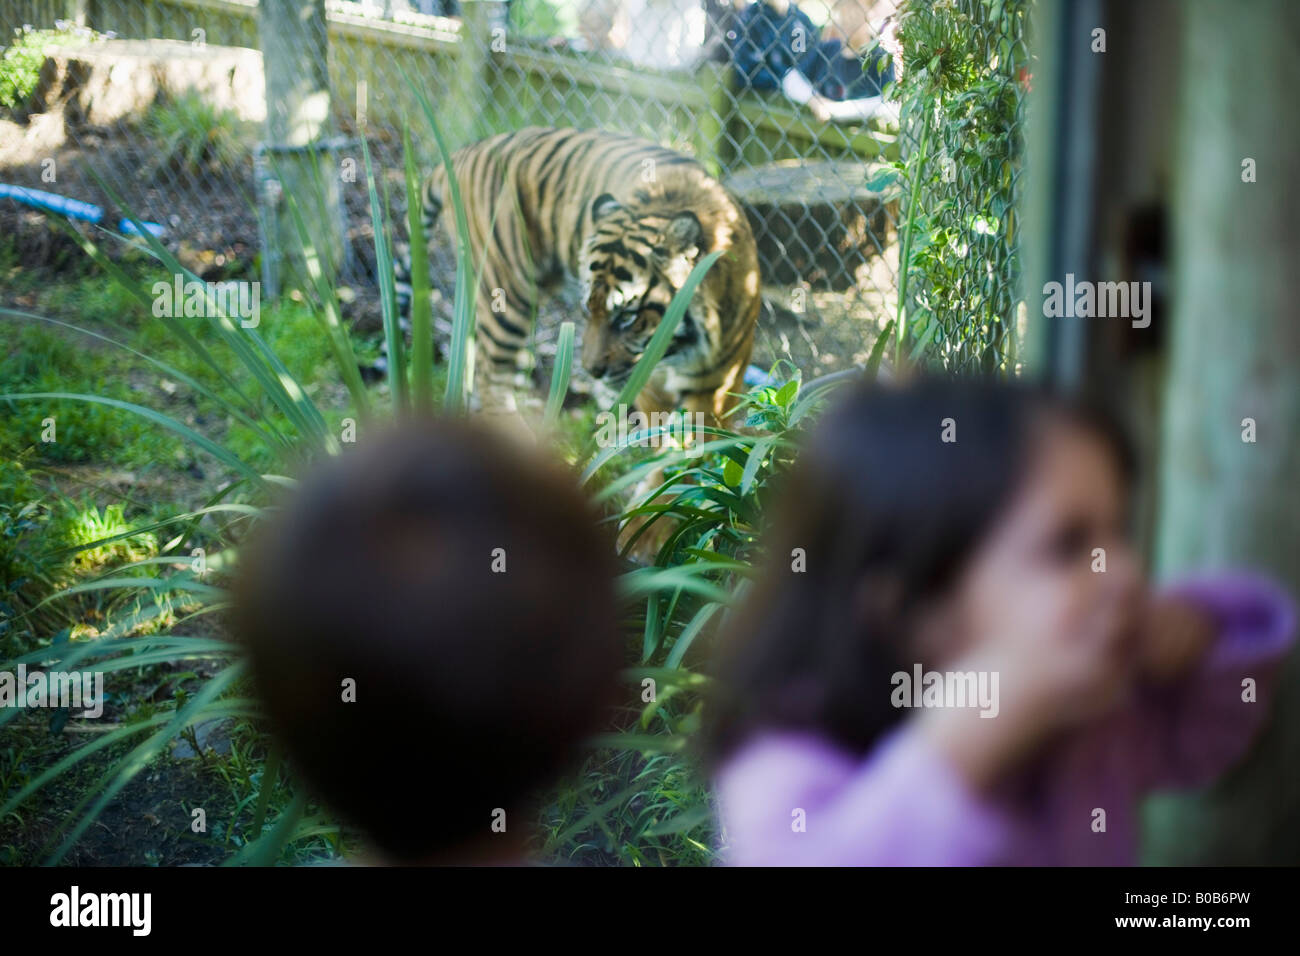 Girl turns and pulls a face emulating the roar of a tiger she has just watched pass by the glass window in front of her Stock Photo